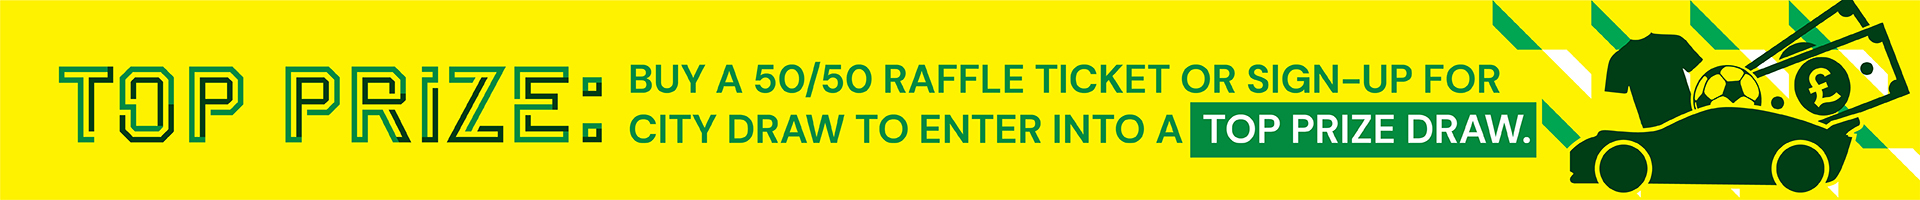 Top Prize: Buy a 50/50 raffle ticket or sign-up for city draw to enter into a top prize draw